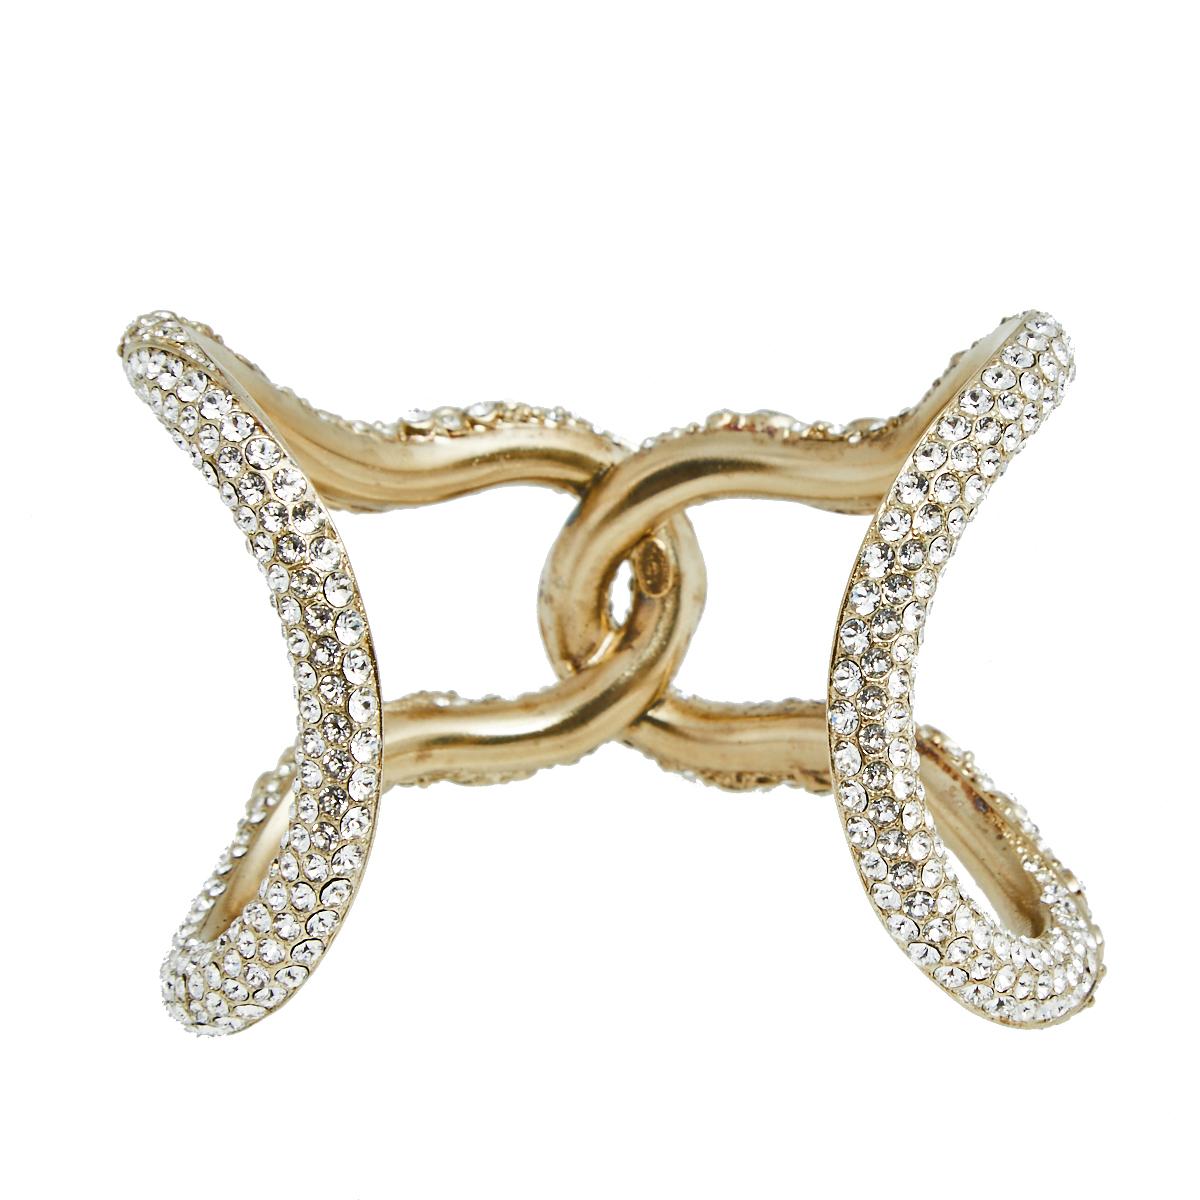 Constructed using gold-tone in an open cuff design, this Chanel bracelet is sure to fit well and look great on your wrist. It is highlighted by crystals for a minimally stylish appeal.

Includes: Original Box